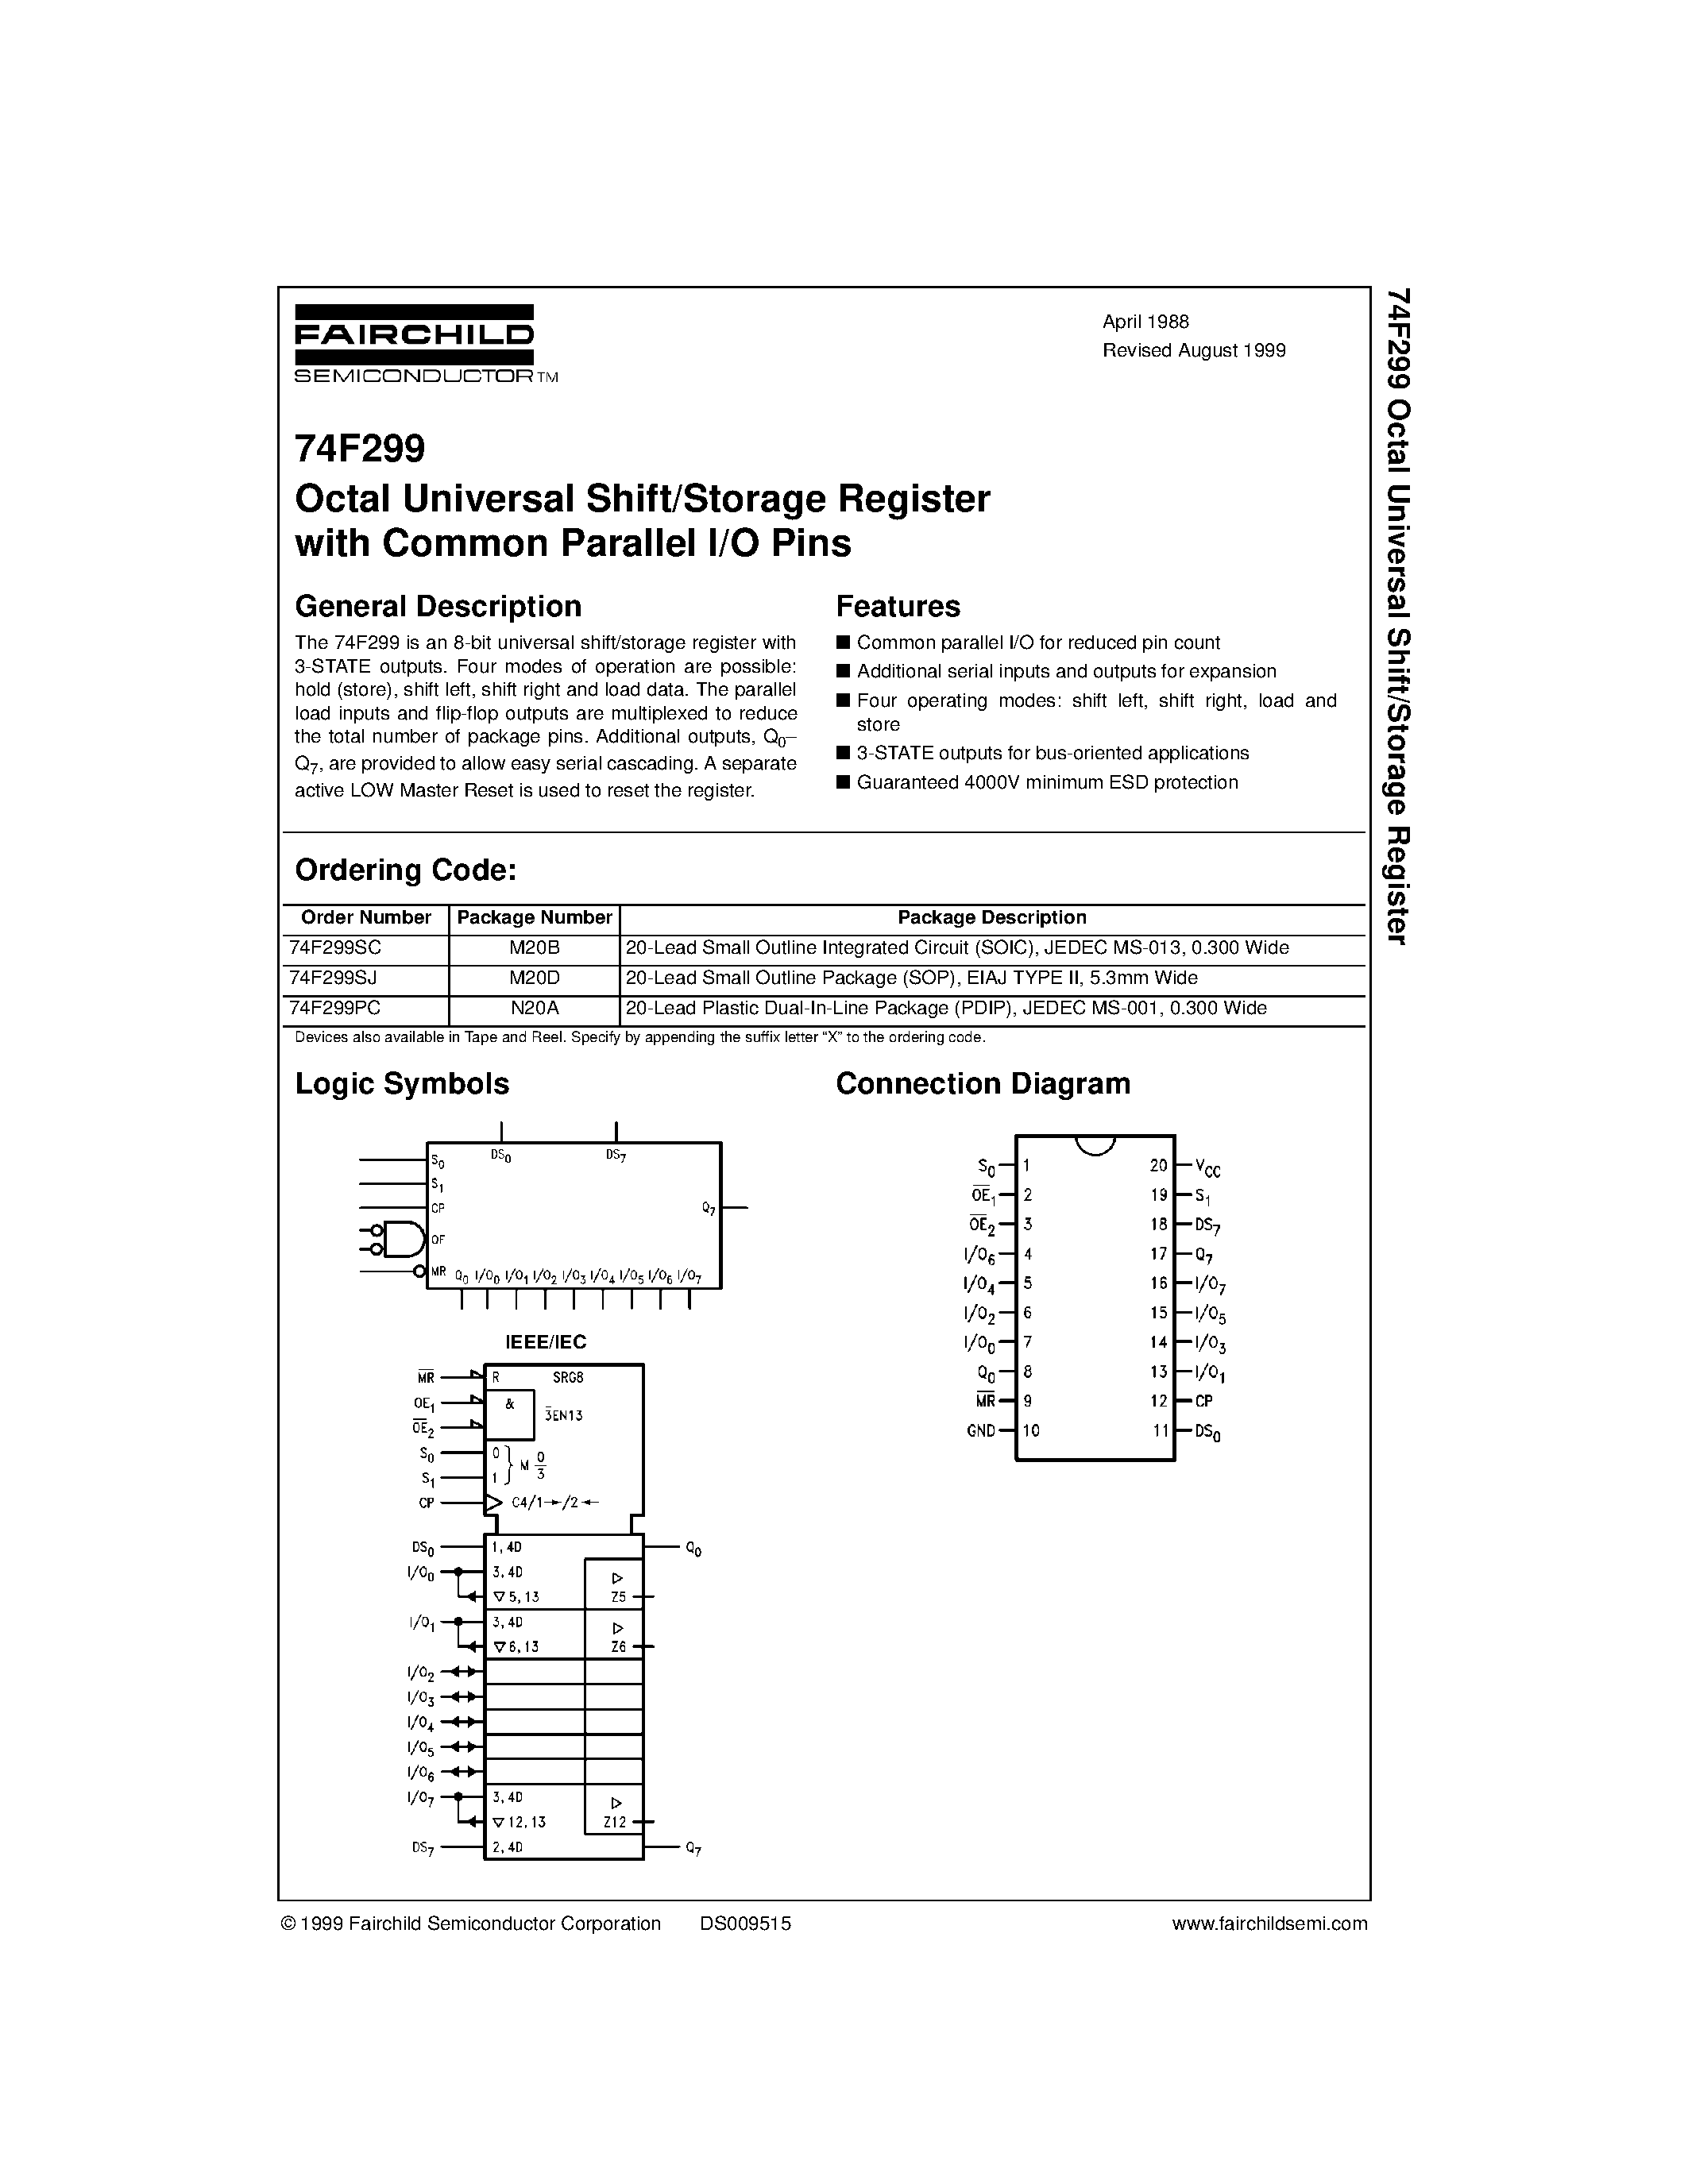 Даташит 74F299PC - Octal Universal Shift/Storage Register with Common Parallel I/O Pins страница 1